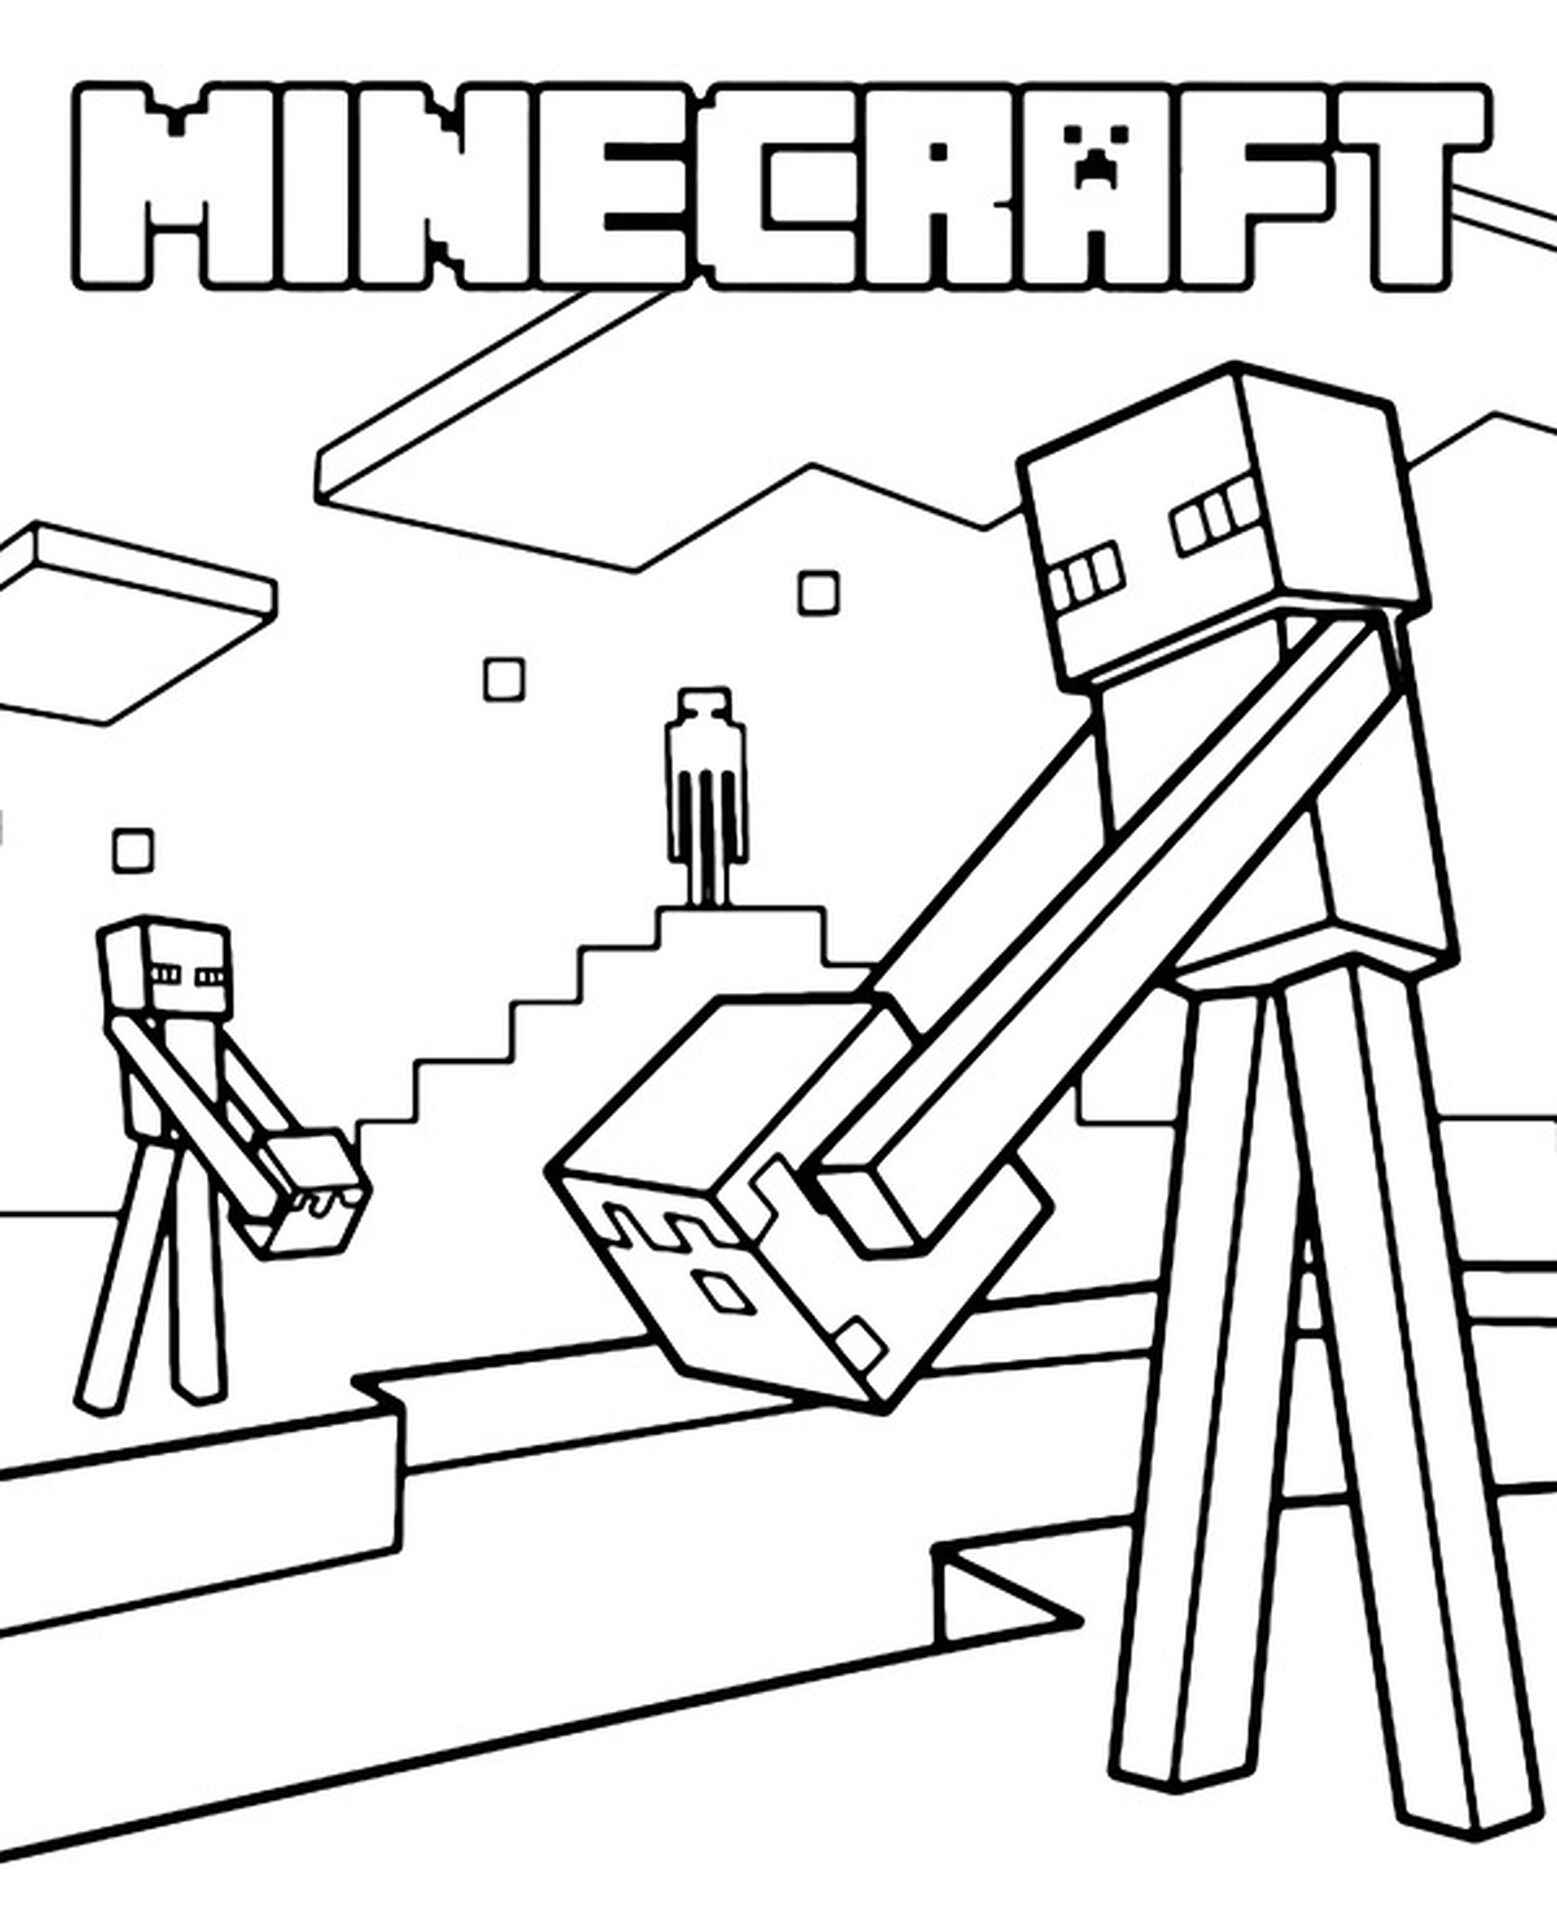 Coloring Page Endermen Steal Blocks In Minecraft (FREE DOWNLOAD)